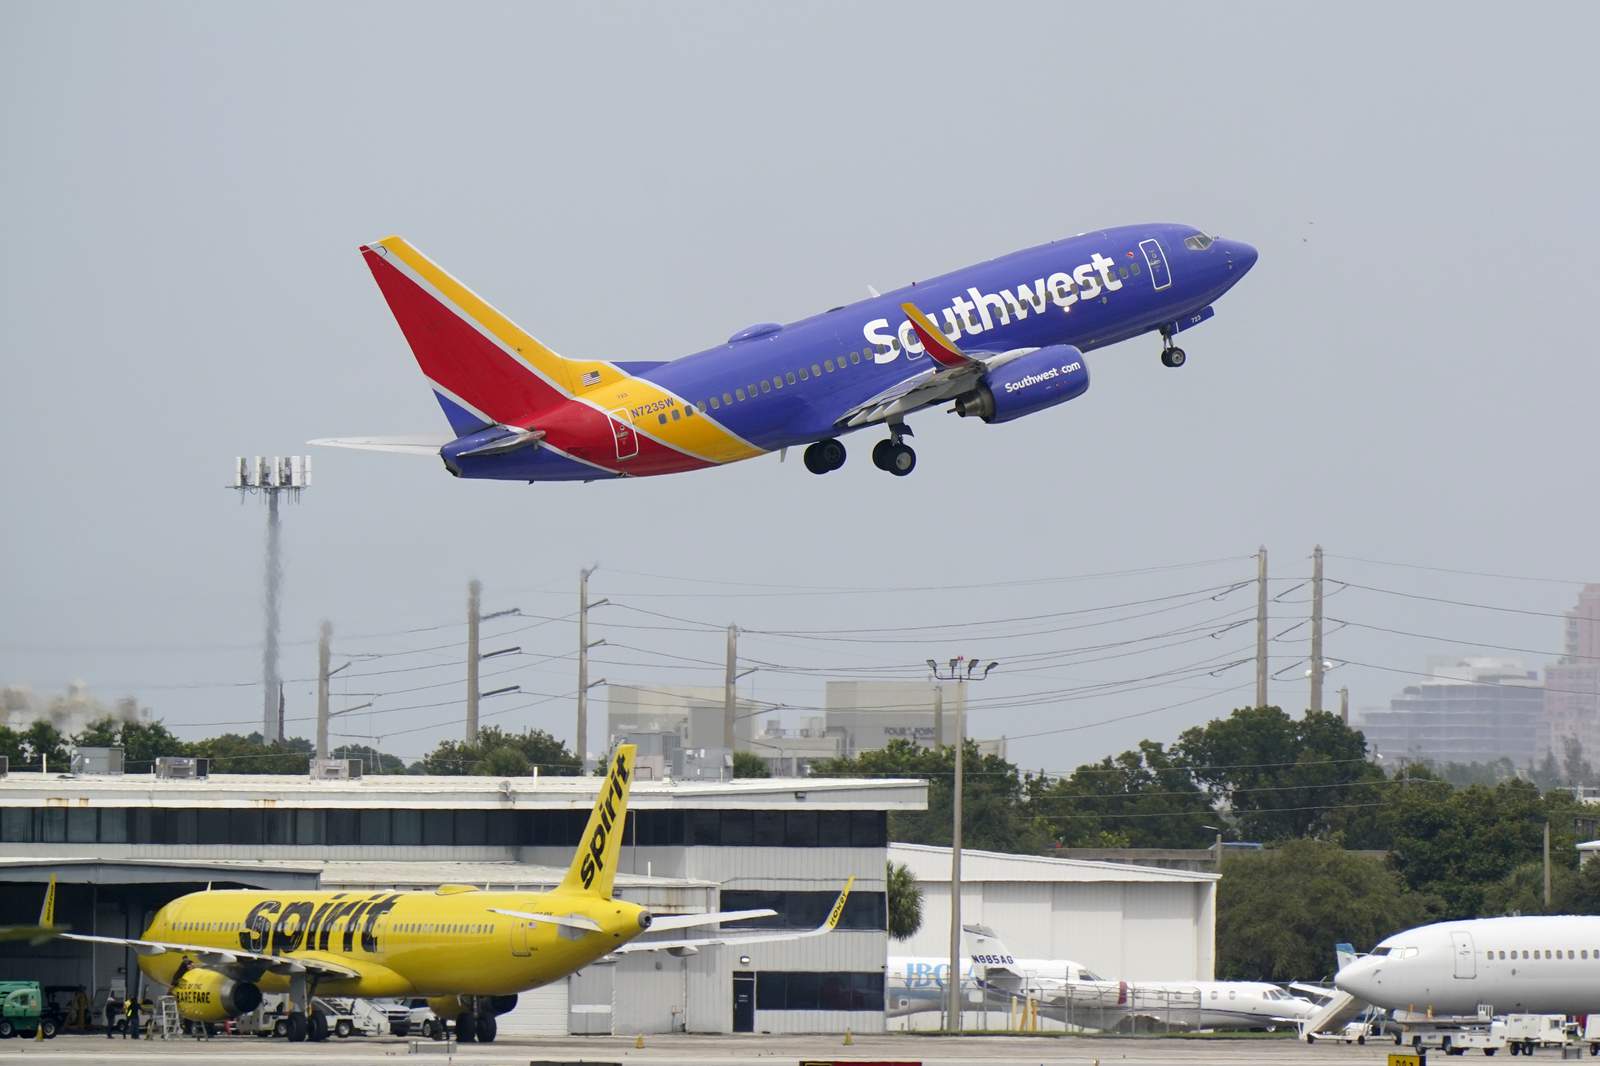 American, Southwest, Alaska add to airline loss parade in 3Q